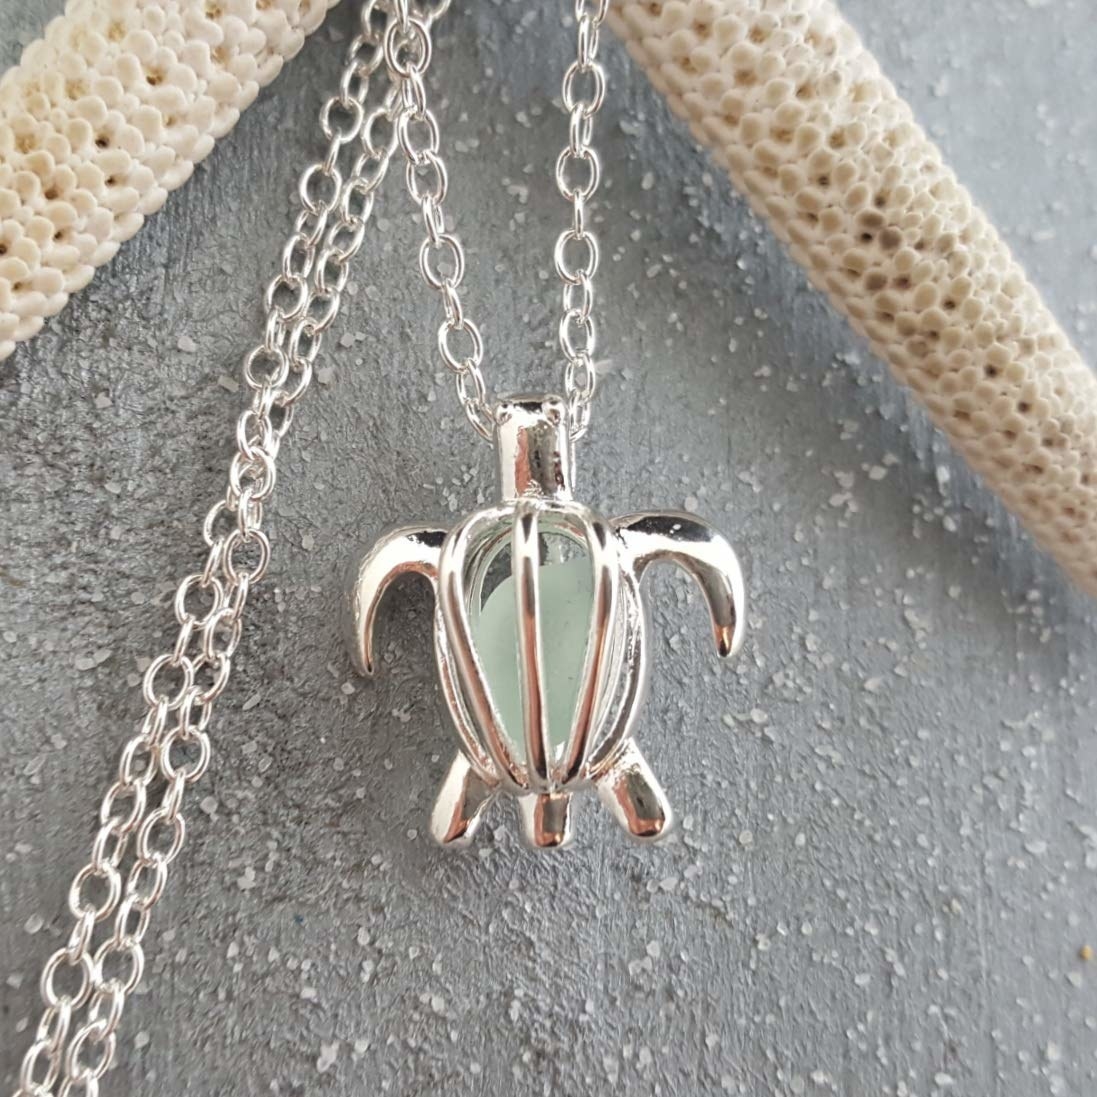 A silver hollow turtle-shaped necklace with a light green gem inside